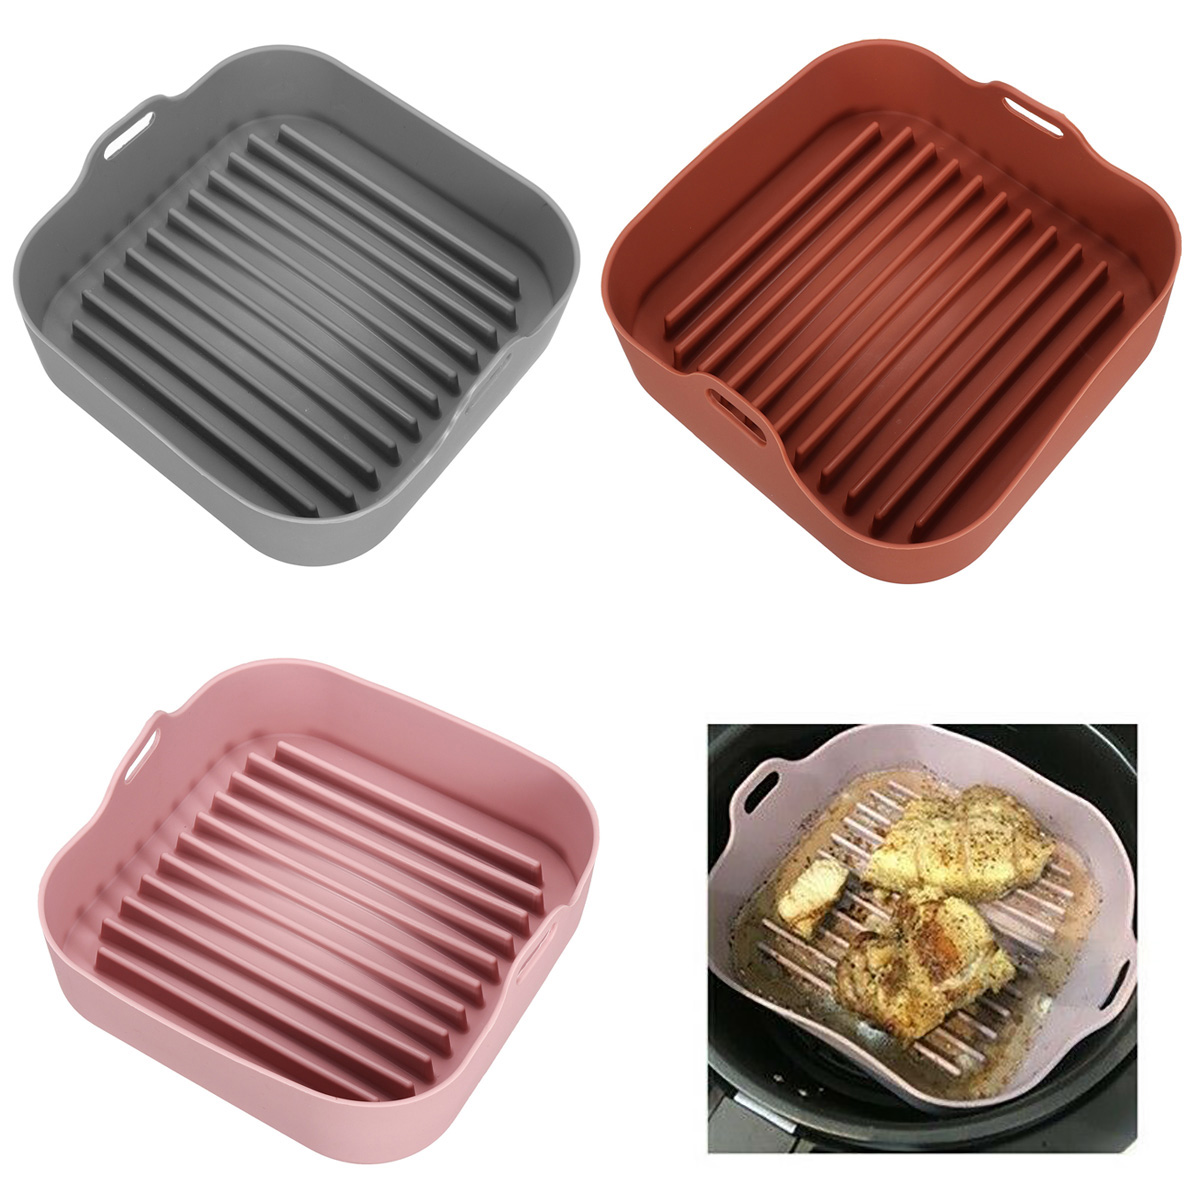 Multifunctional-Silicone-Baking-Tray-High-Temperature-Resistant-Non-stick-Bread-Fried-Baking-Pan-wit-1864776-3